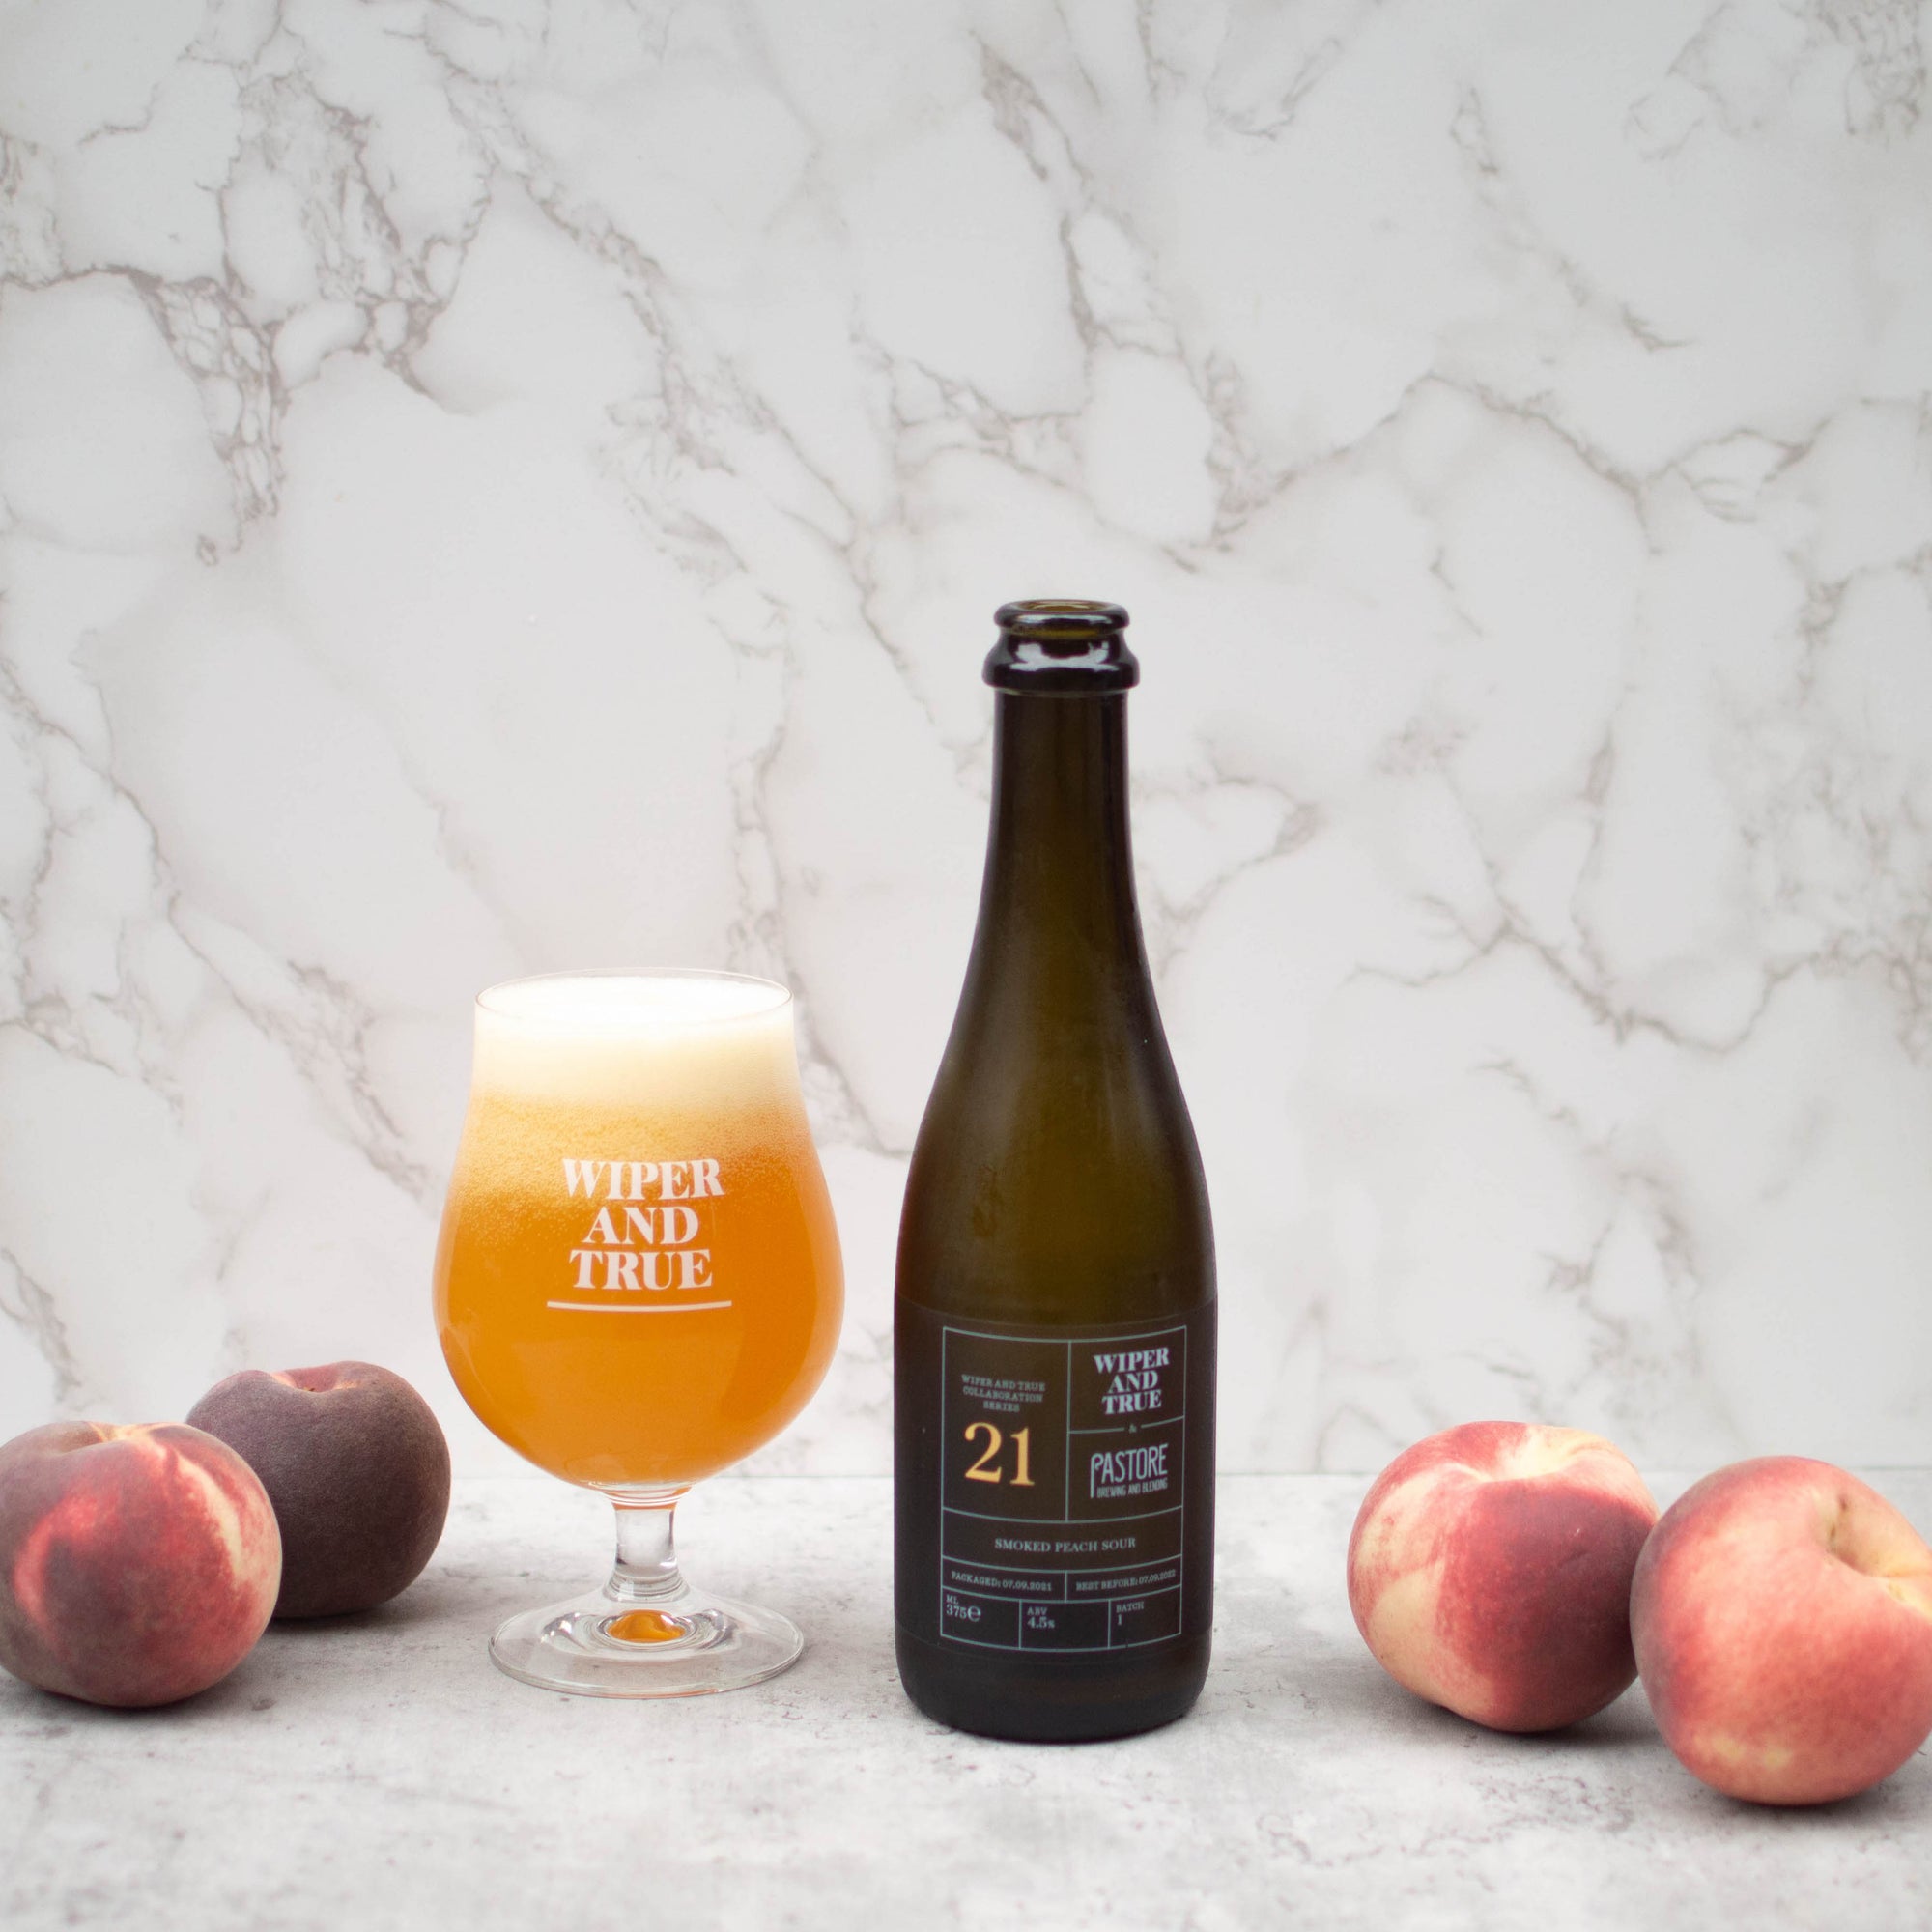 Life’s A Peach: On Lactobacillus, Smoked Peaches & Our Love of Pastore